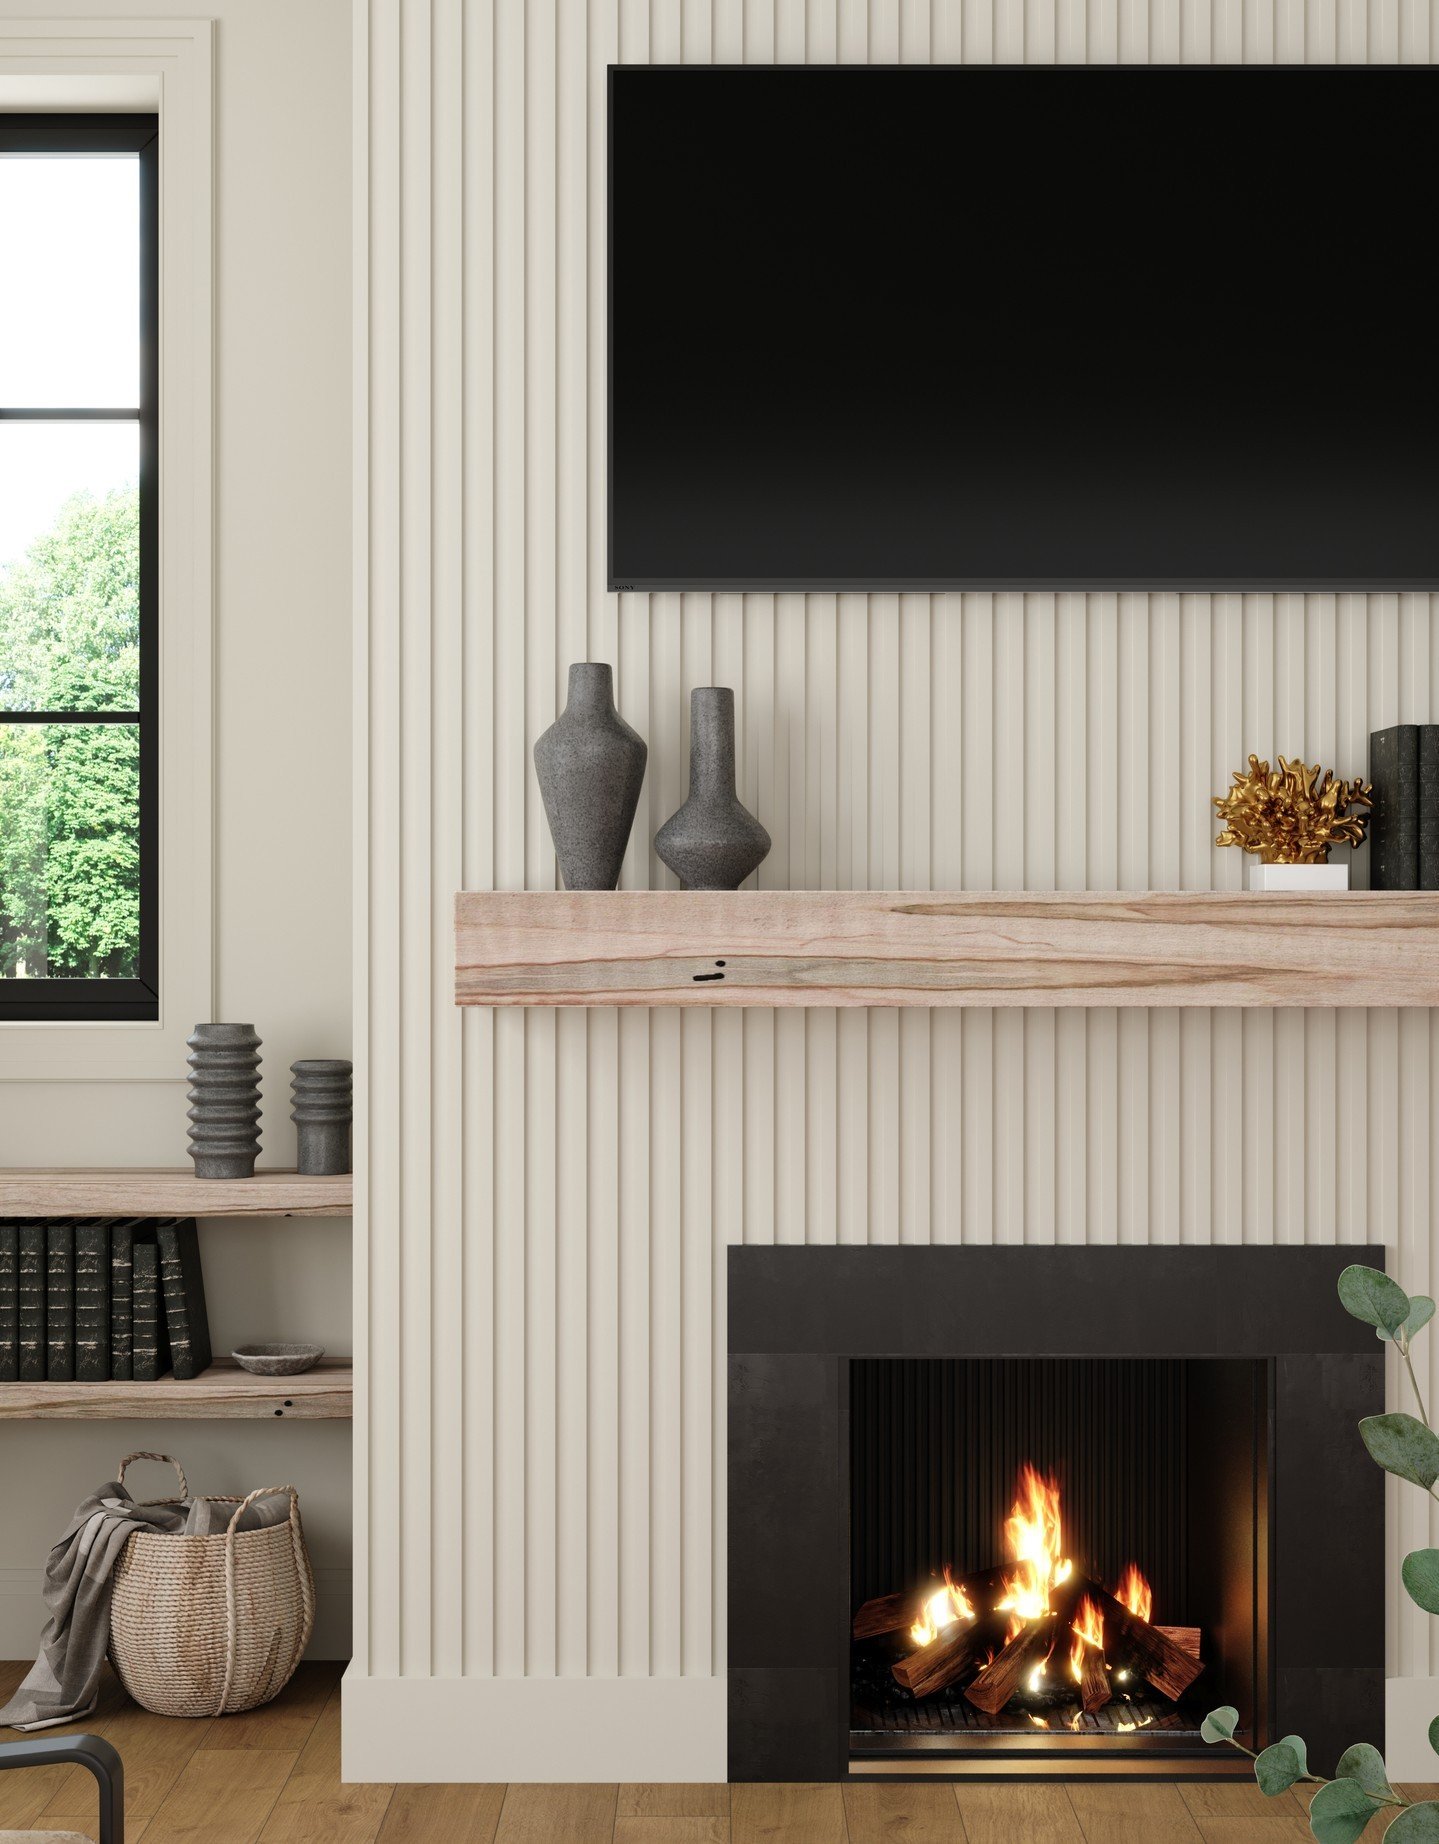 Want to create a unique fireplace? Or accent panels can add texture and our mantels are perfect to add your d&eacute;cor.
-
#OrnamentalBuild #LoveTheRoom #InteriorDesign #DecorativeMoulding #AccentWall #HomeDecor